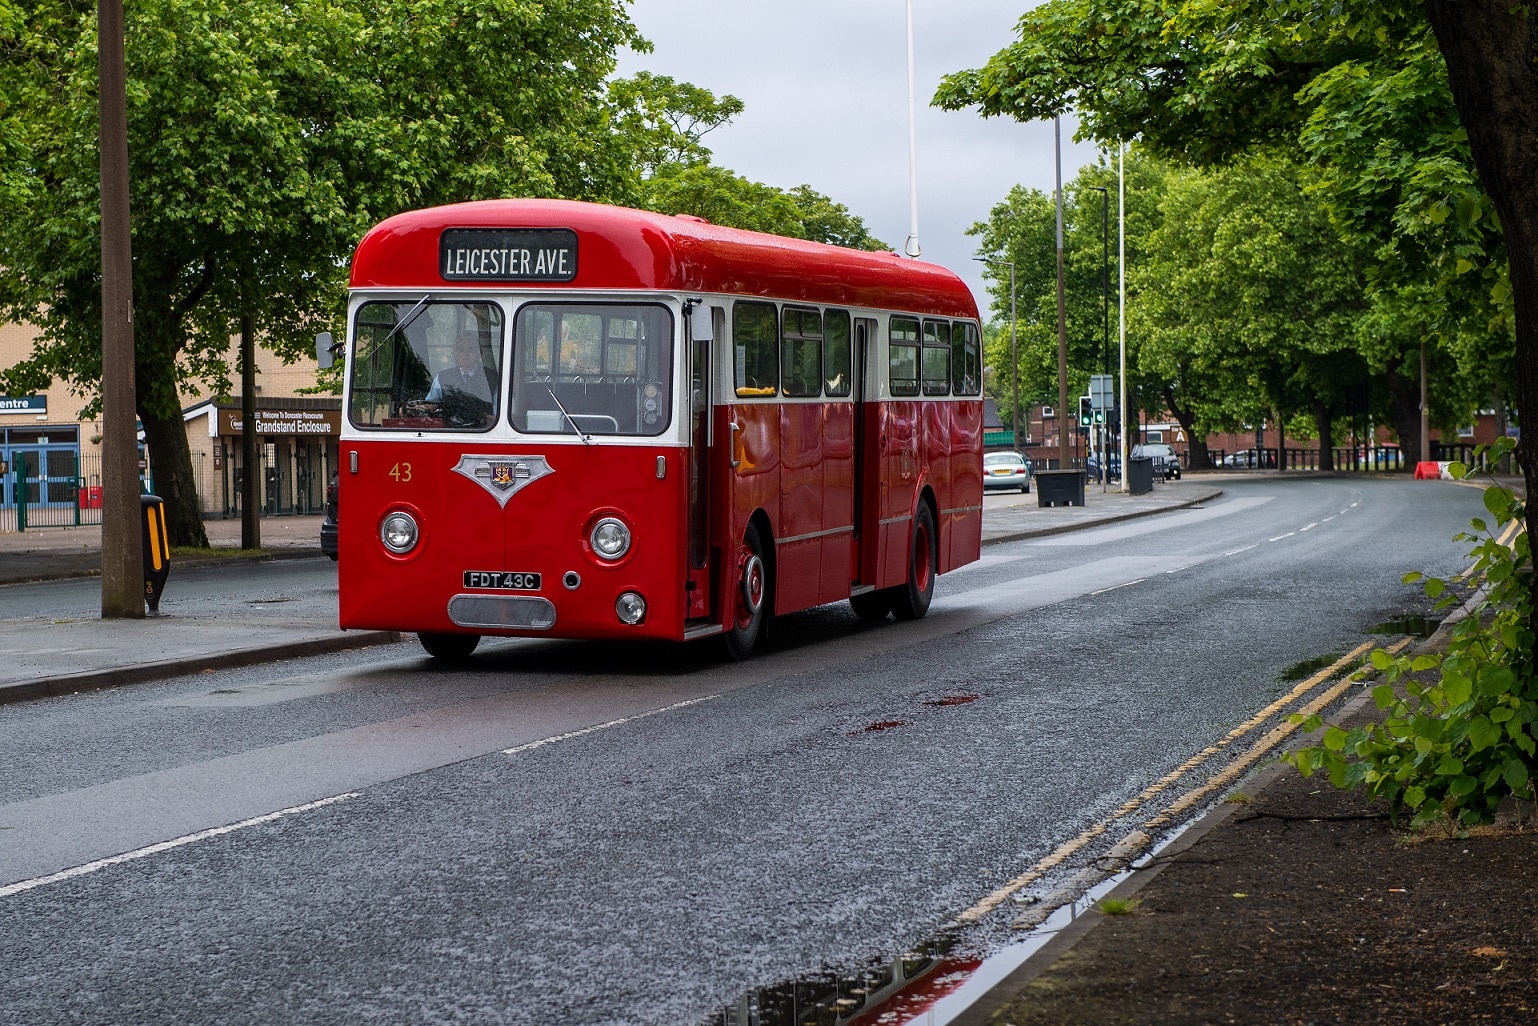 Heritage bus formerly used in Doncaster